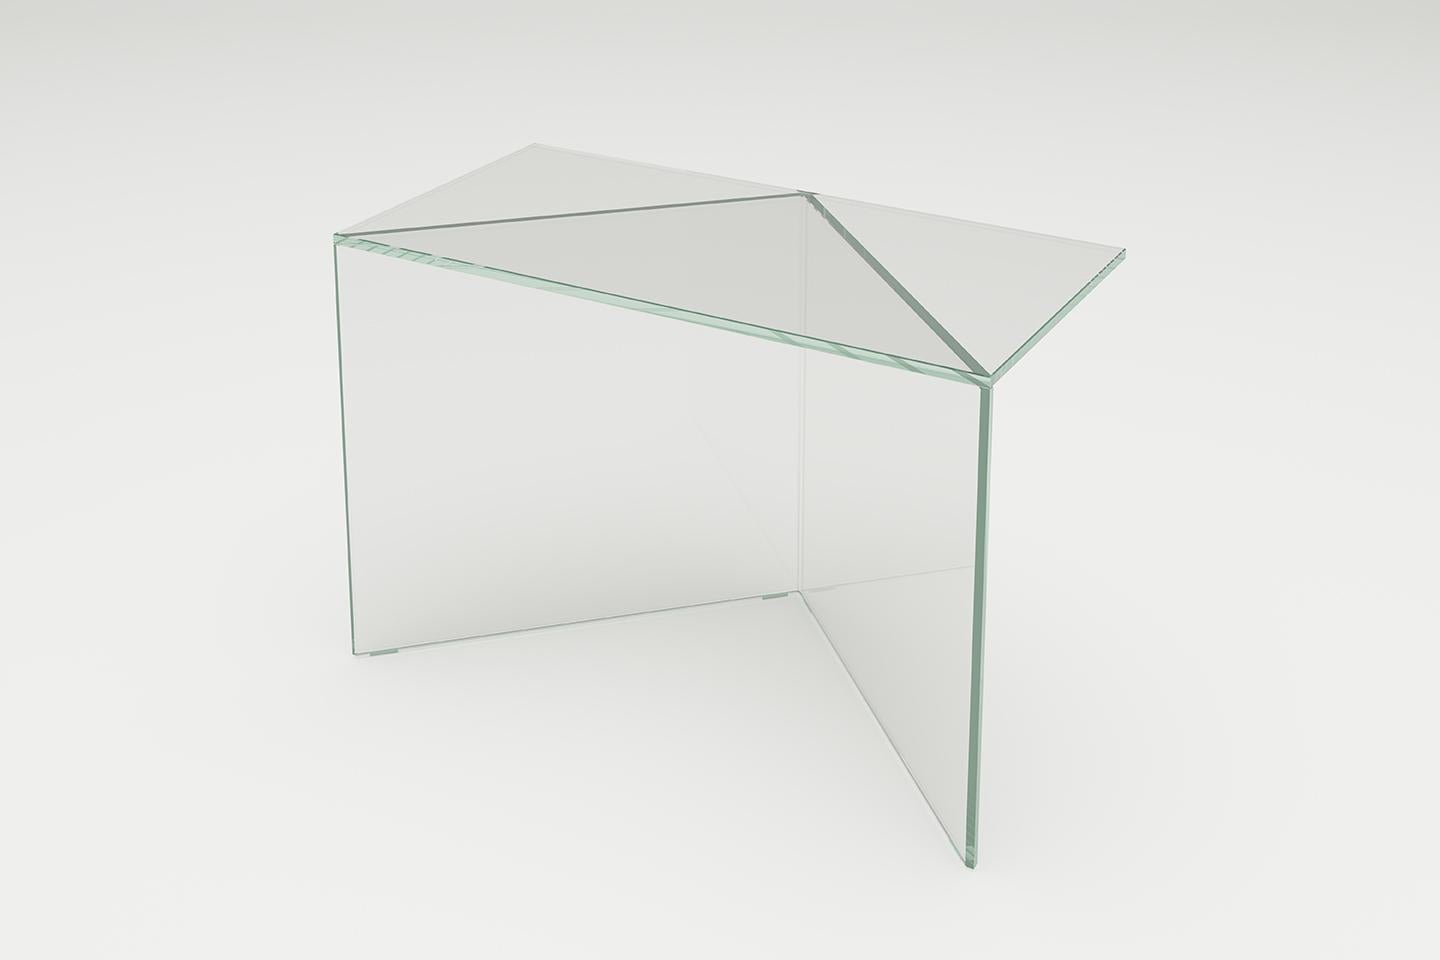 White clear glass poly square coffee table by Sebastian Scherer.
Dimensions: D60 x W30 x H40 cm
Materials: Solid coloured glass.
Weight: 12.7 kg.
Also Available: Colours:Clear white (transparent) / clear green / clear blue / clear bronze / clear